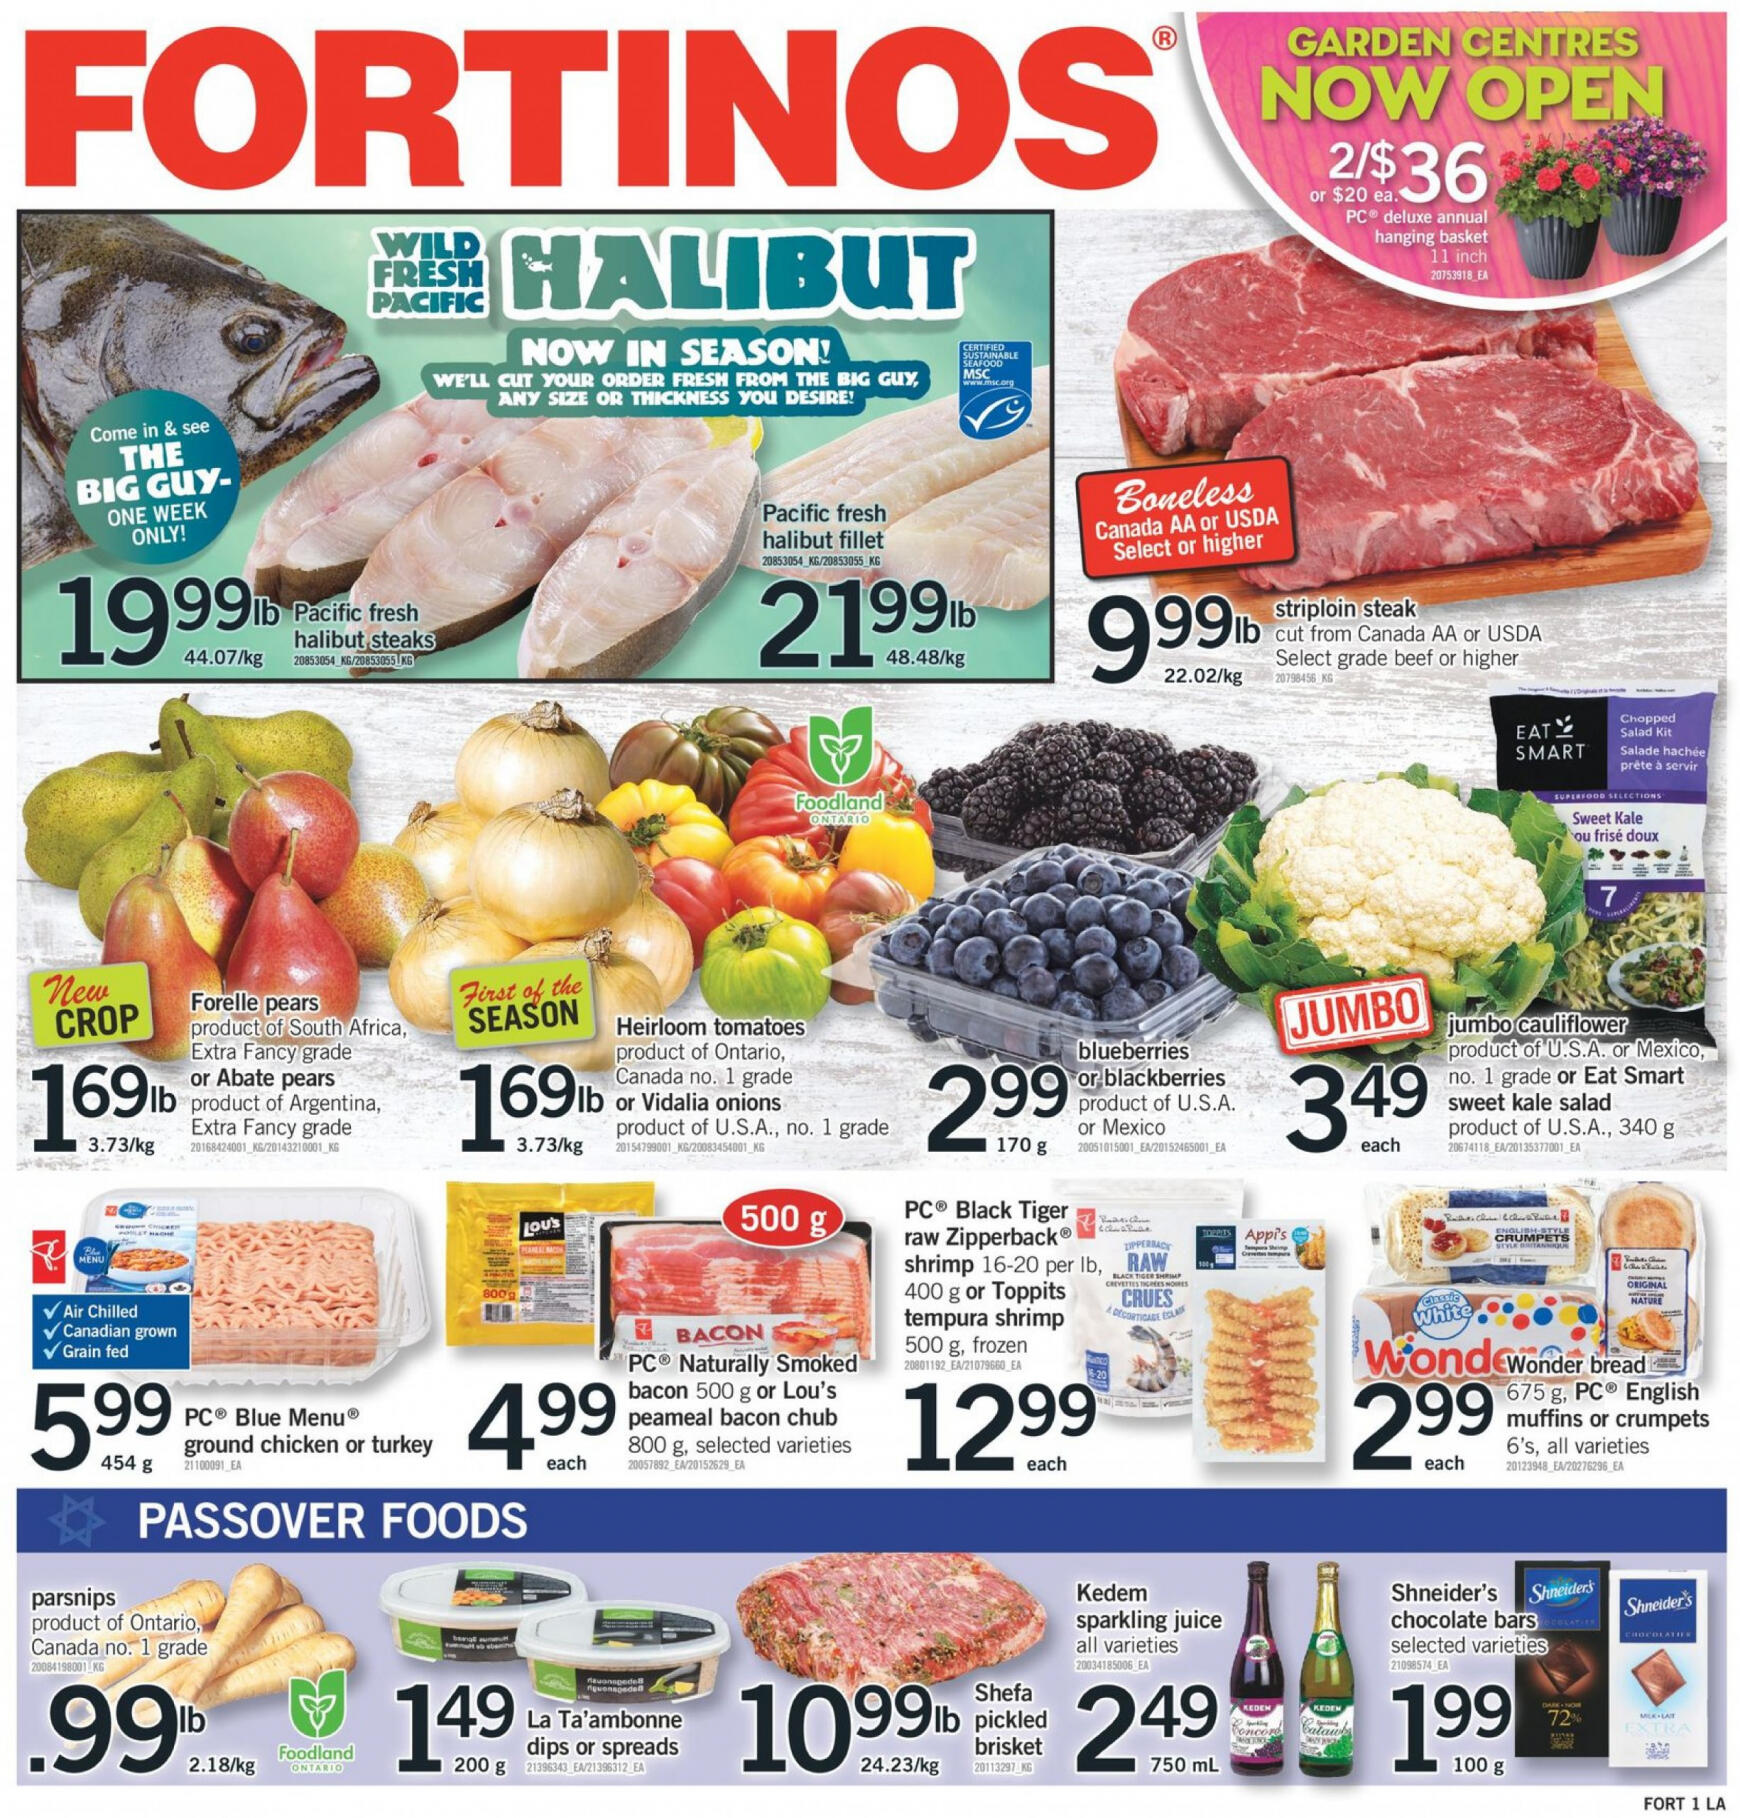 fortinos - Fortinos flyer current 25.04. - 01.05.